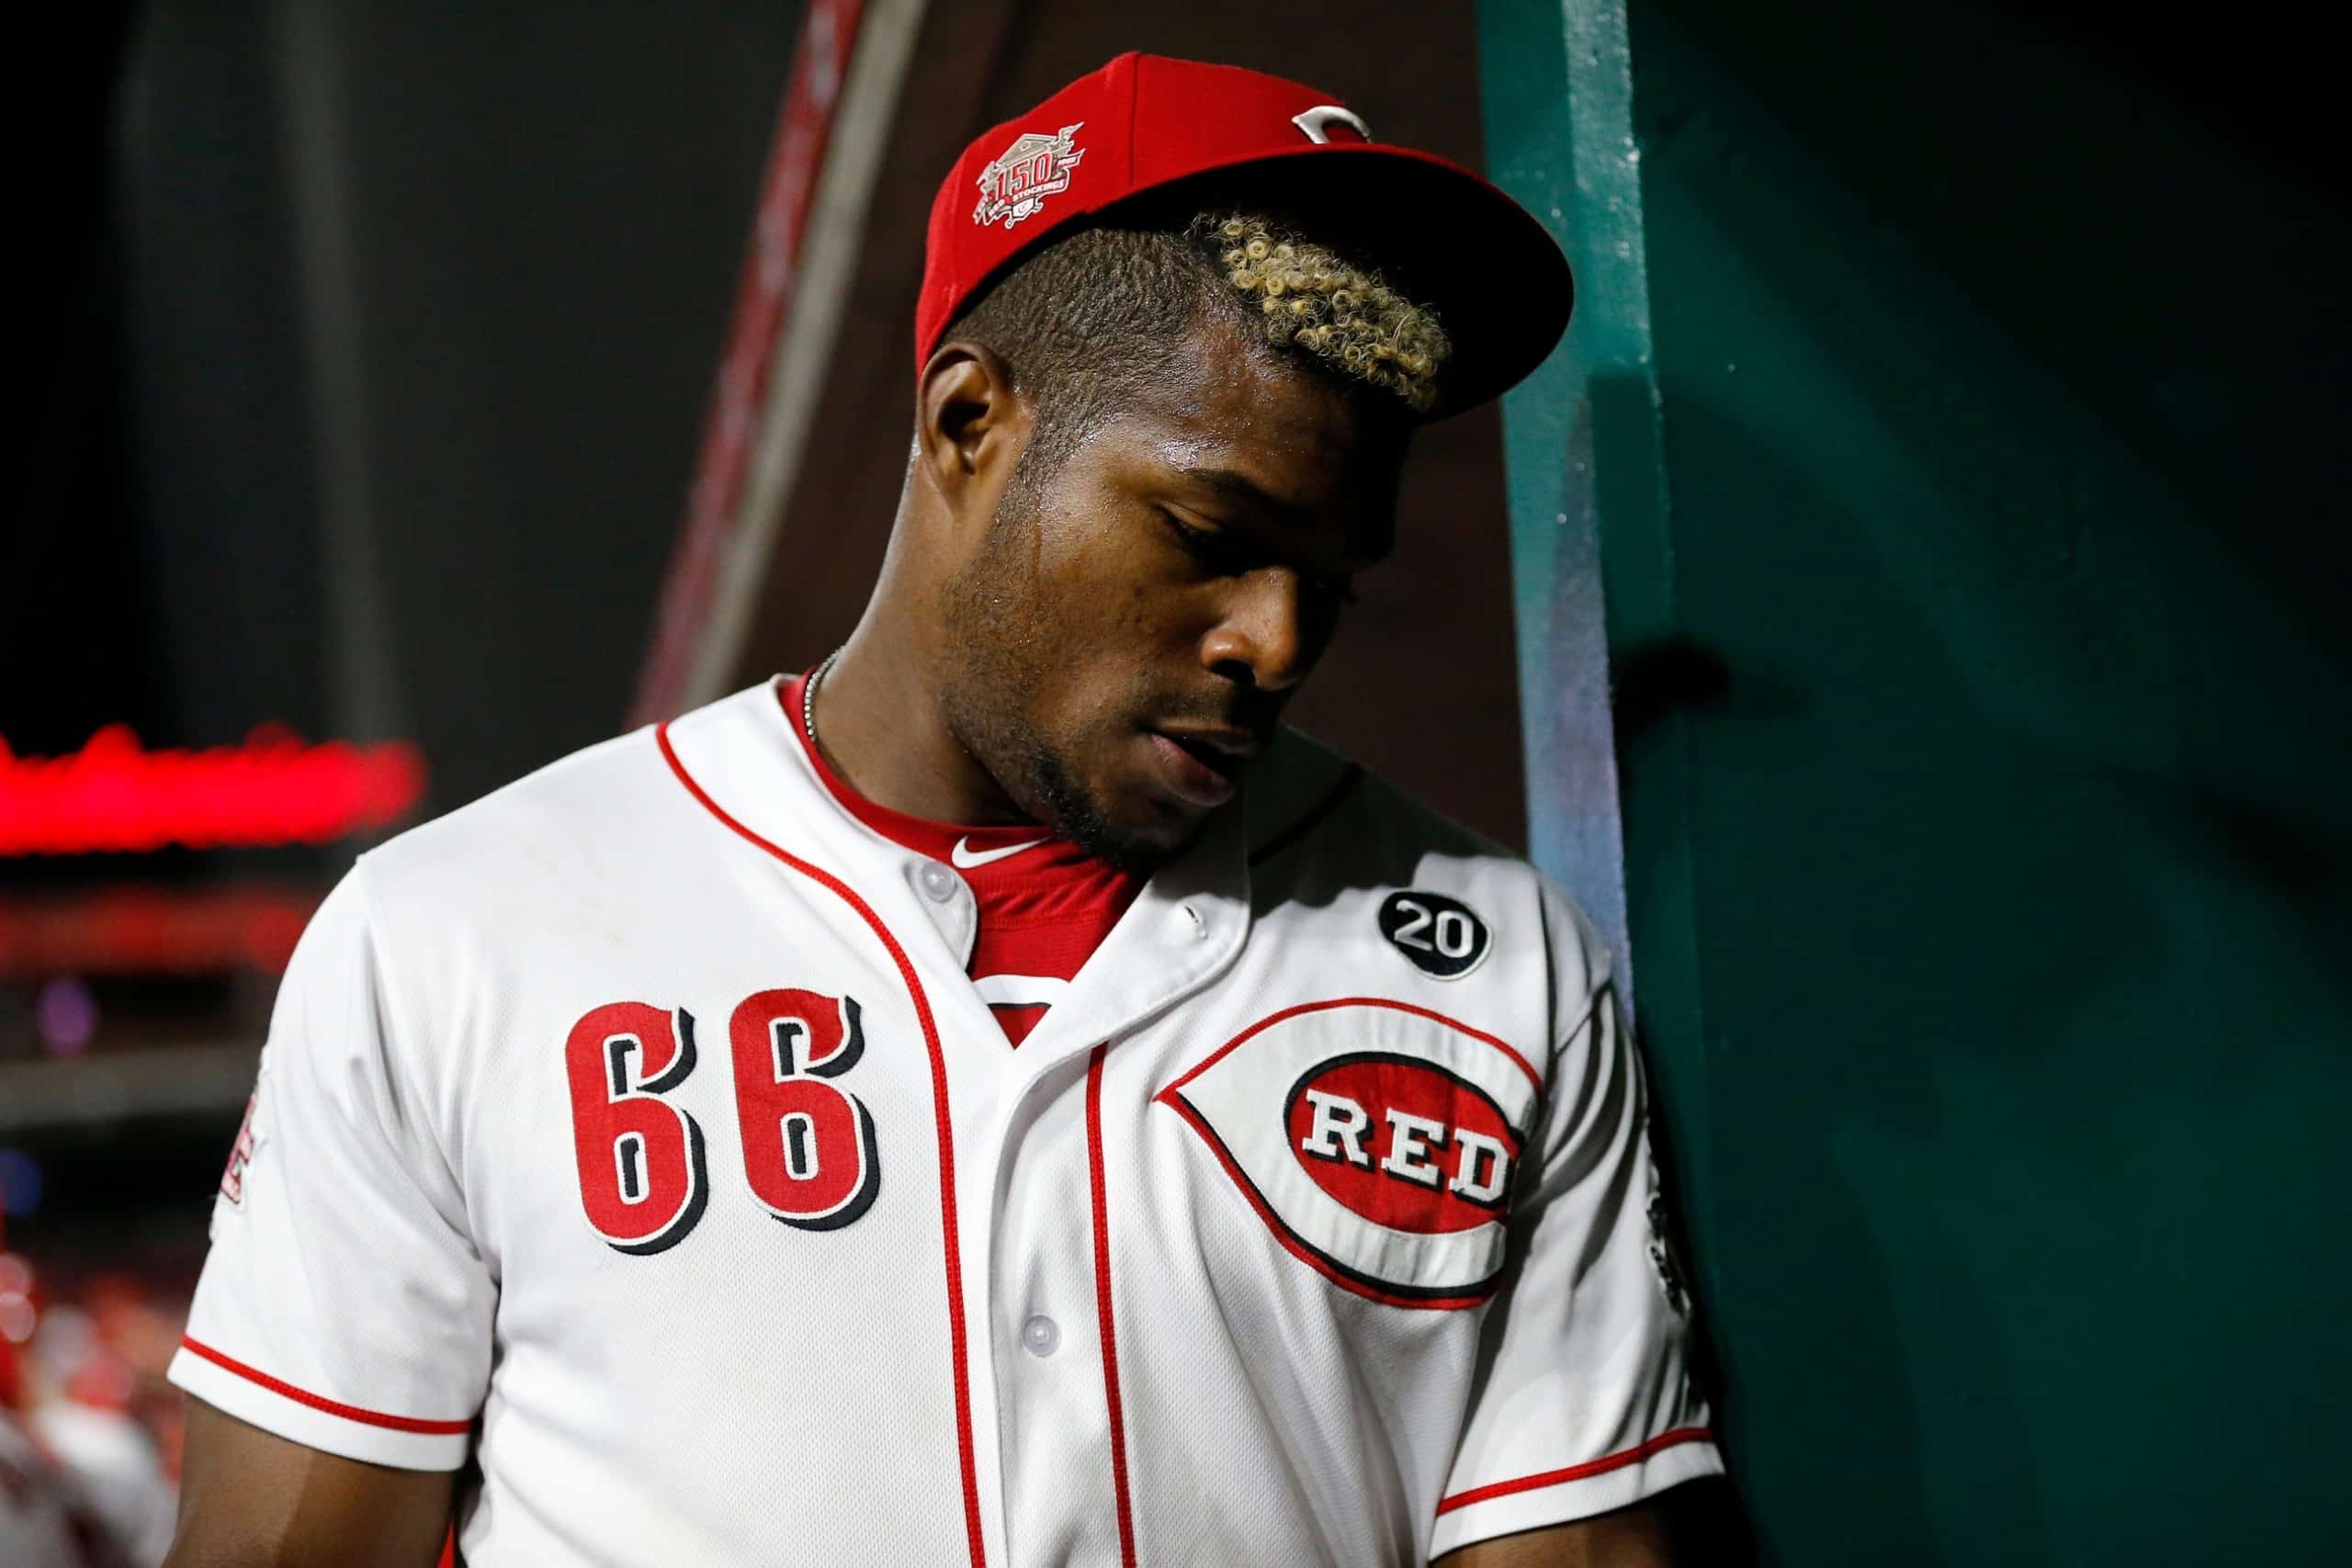 Yasiel Puig's agent claims the former MLB star felt 'rushed' at probe  federal agents